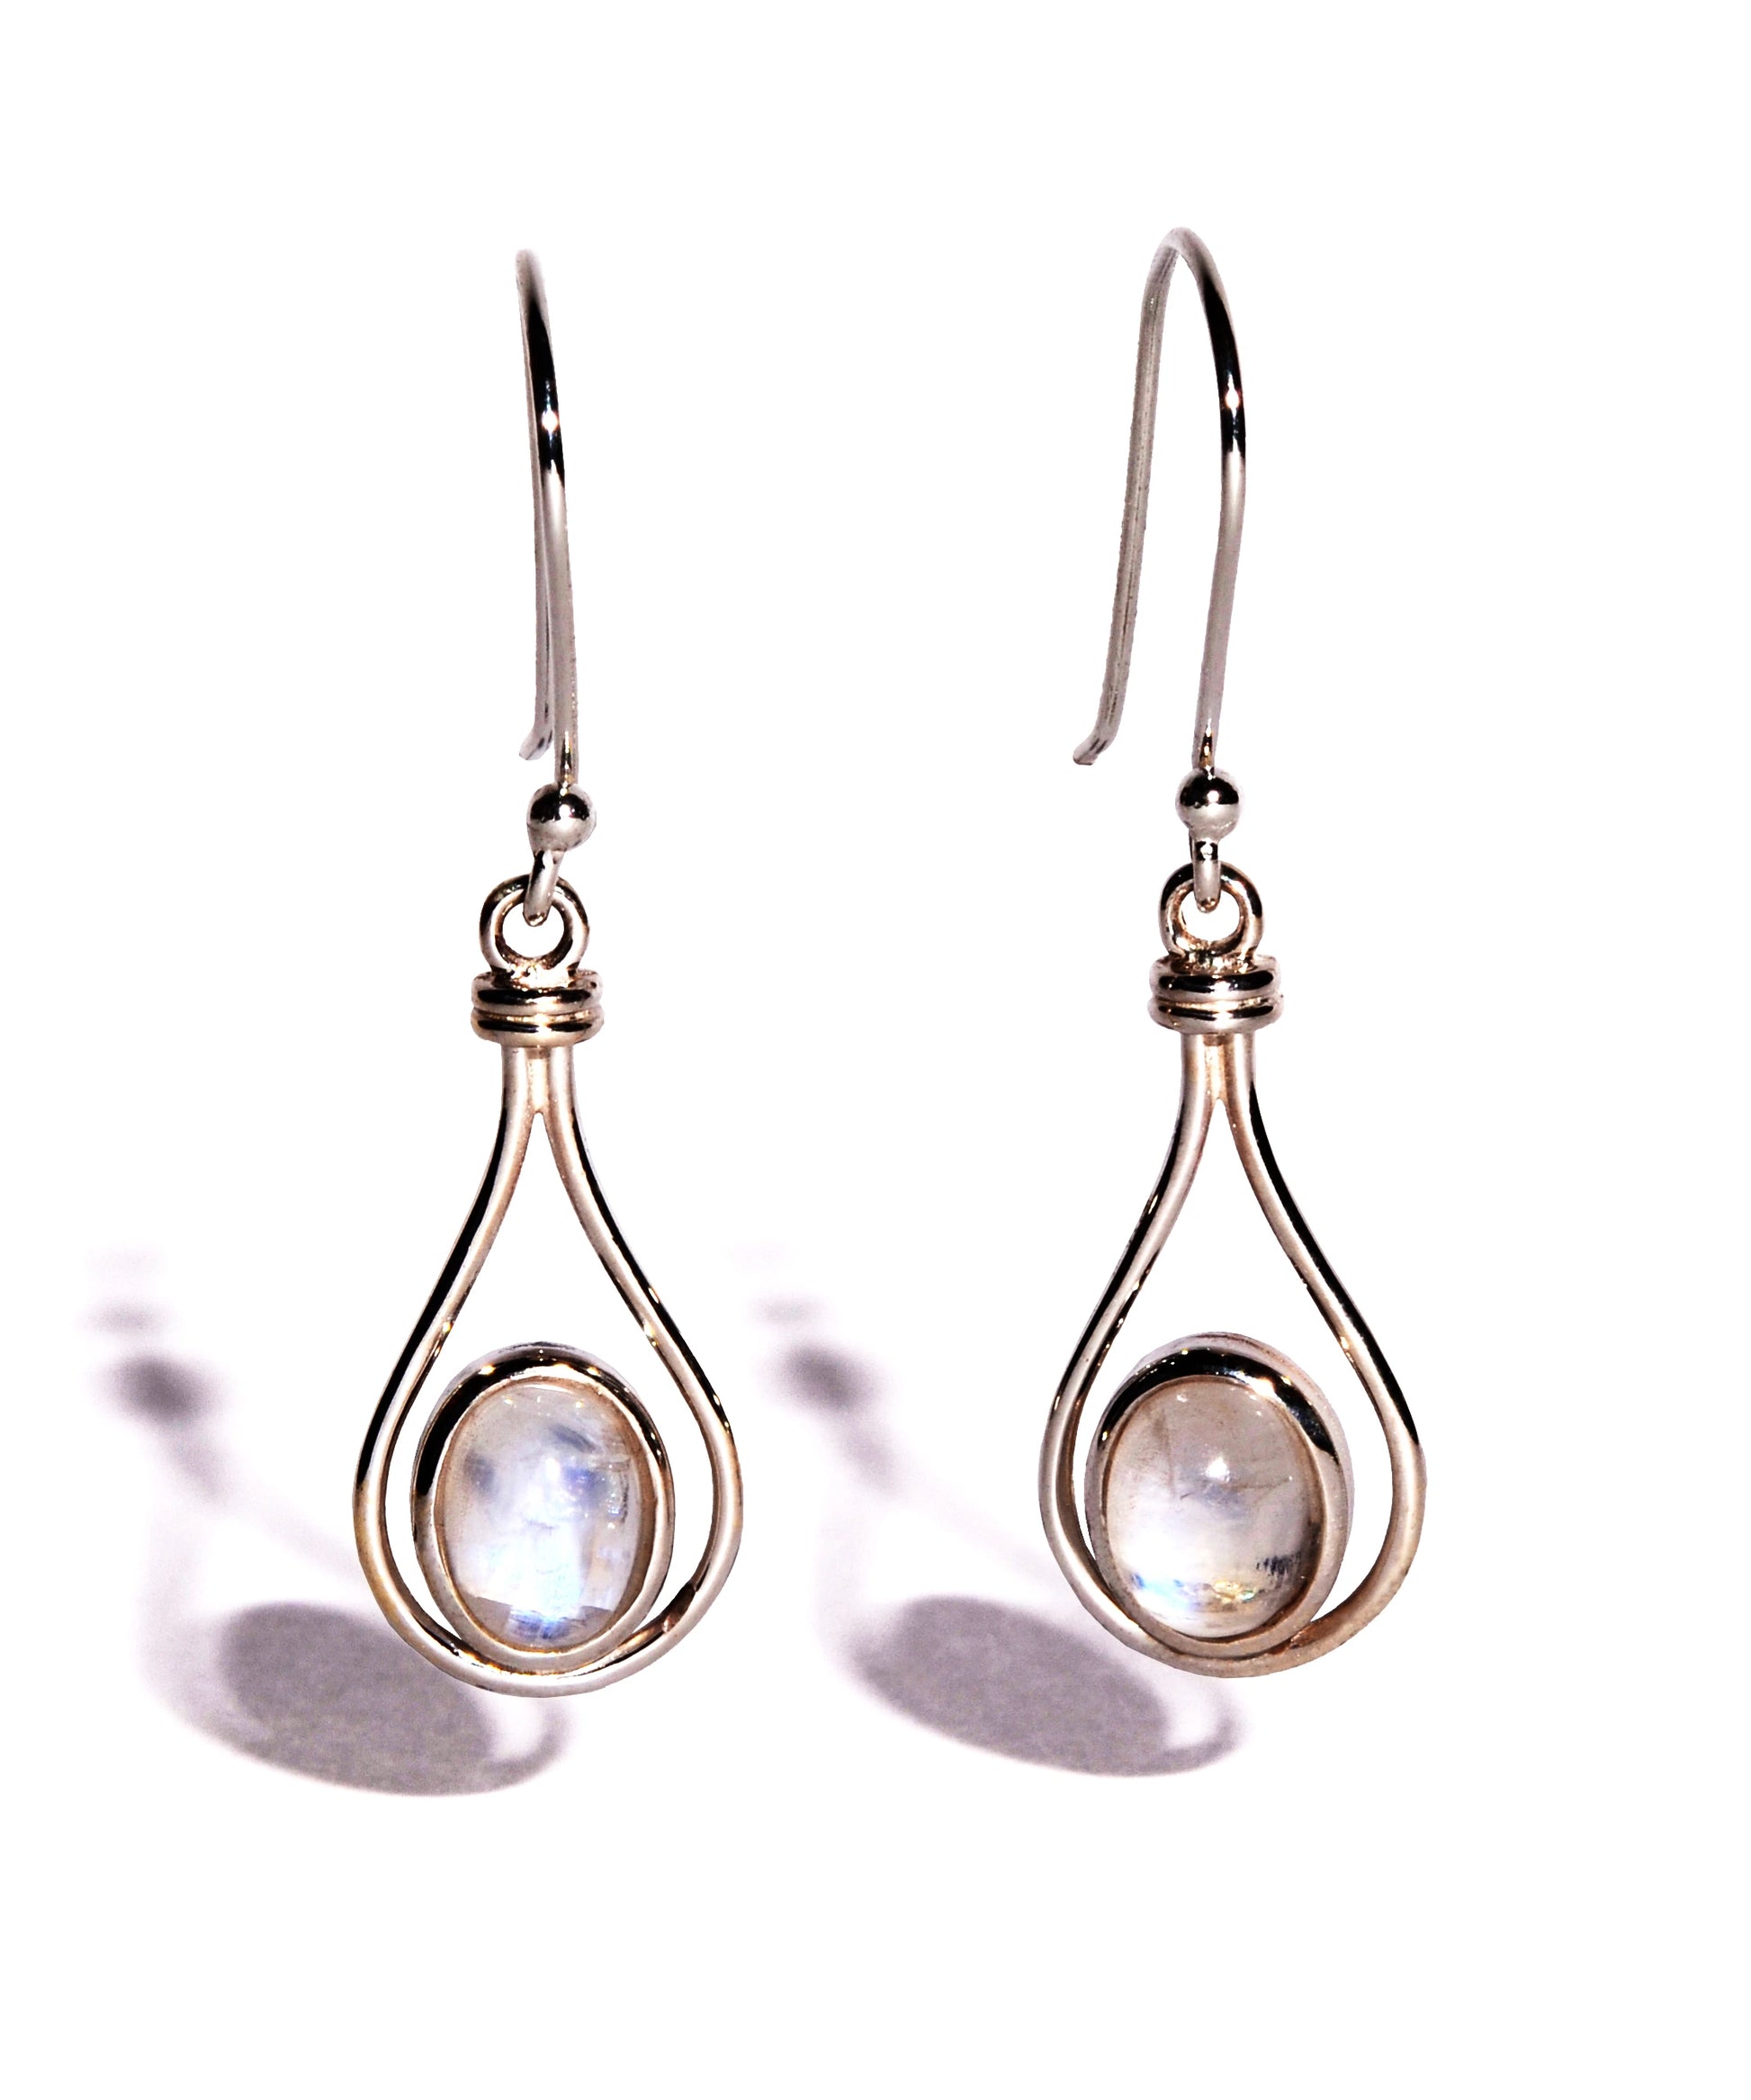 Rainbow Moonstone Sterling Silver Earrings - Oval Crystals